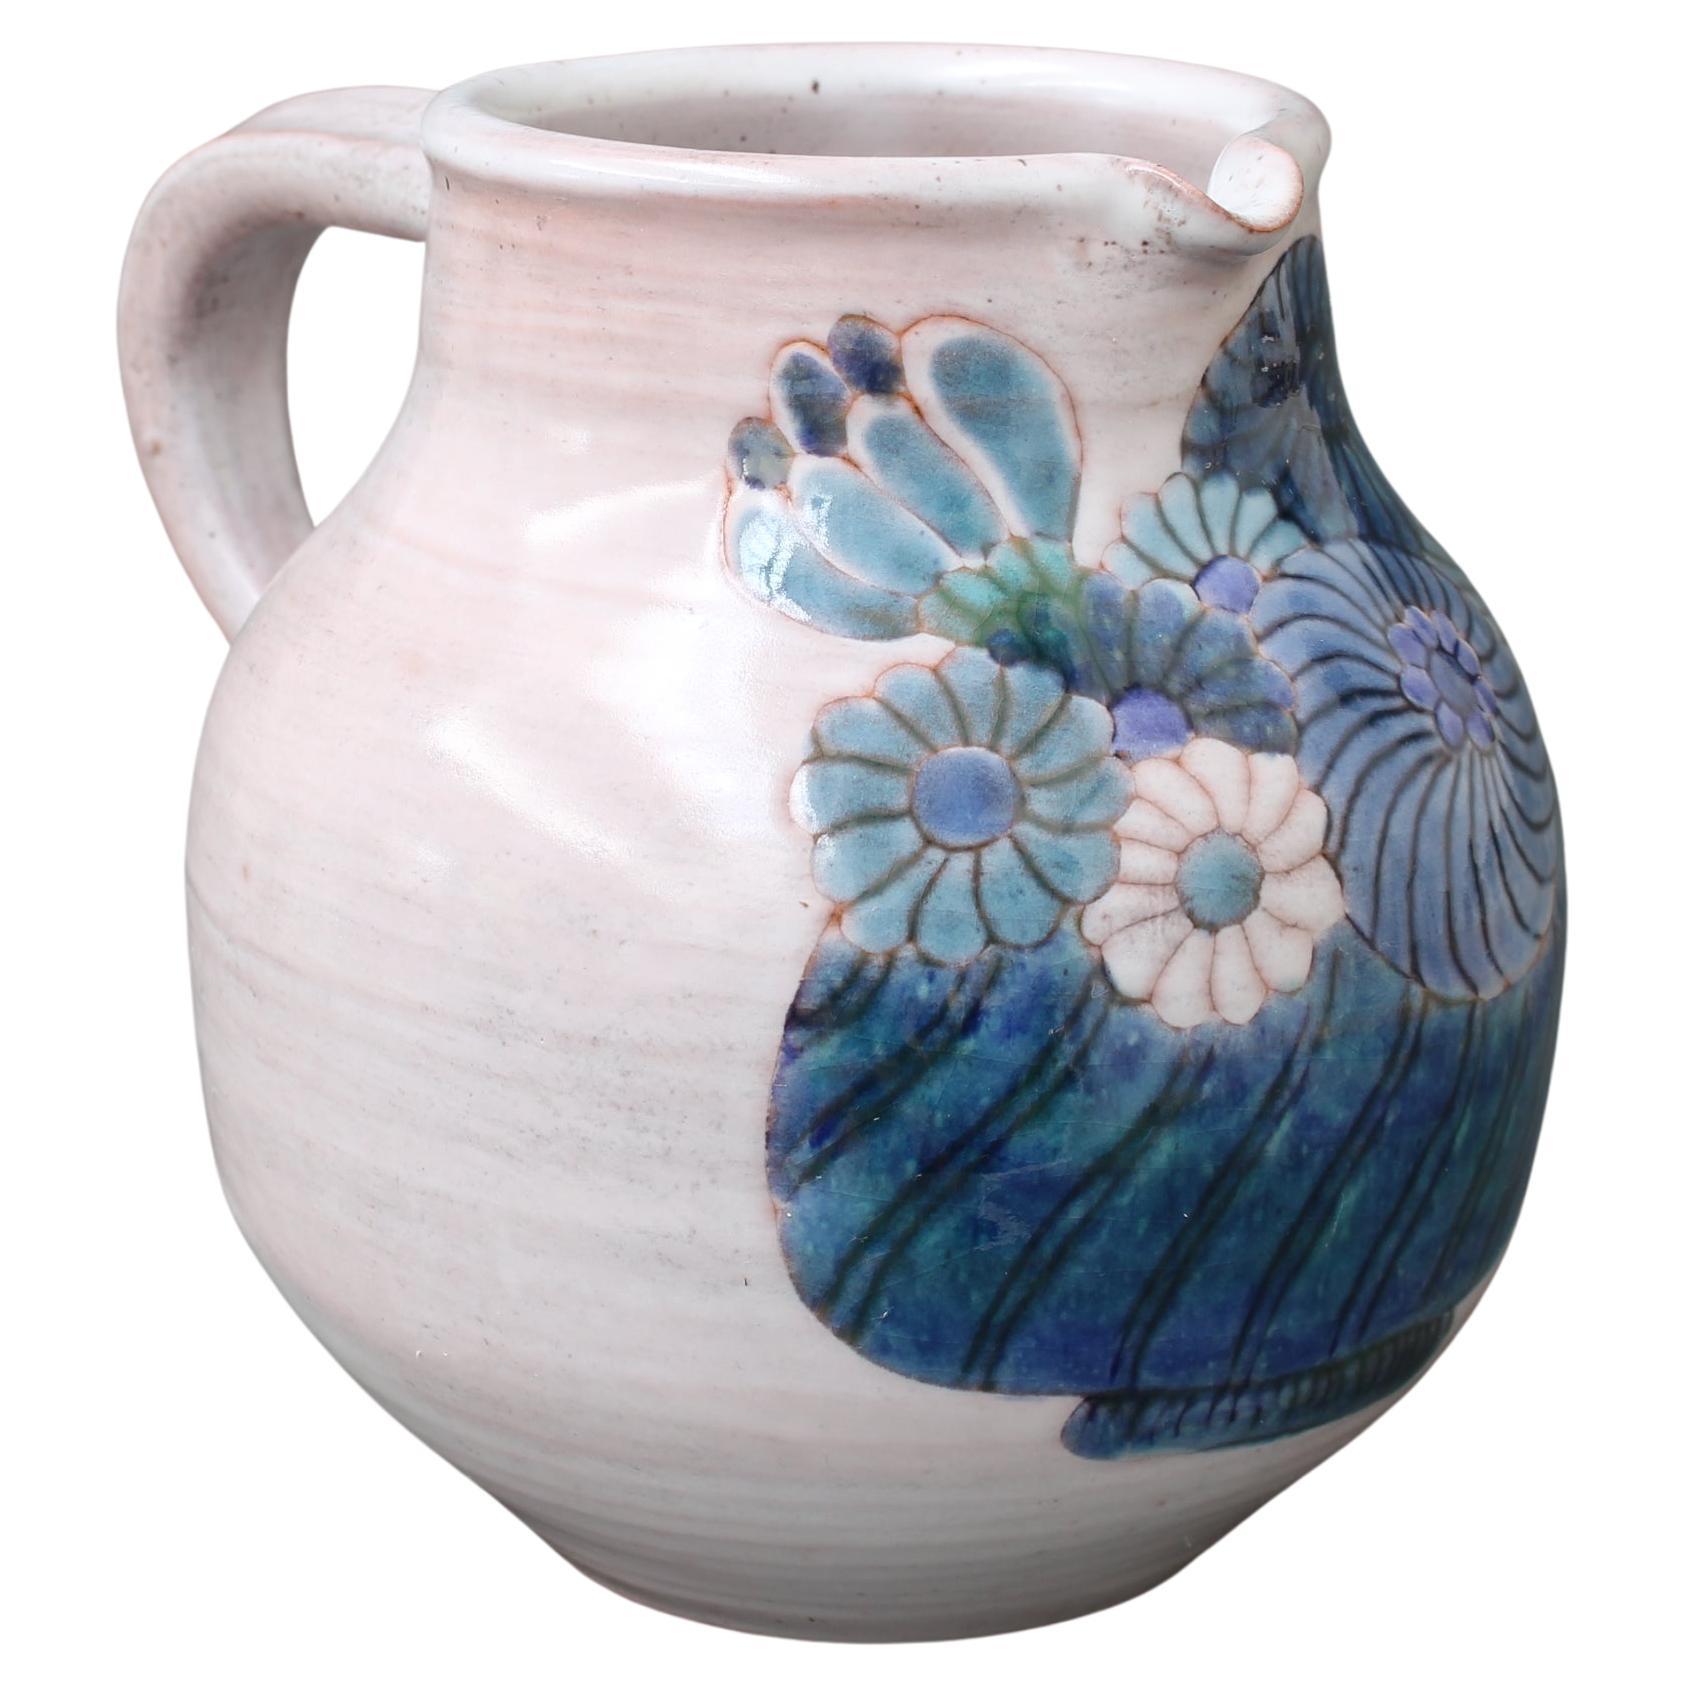 French Ceramic Pitcher with Flower Motif by the Cloutier Brothers (circa 1970s) For Sale